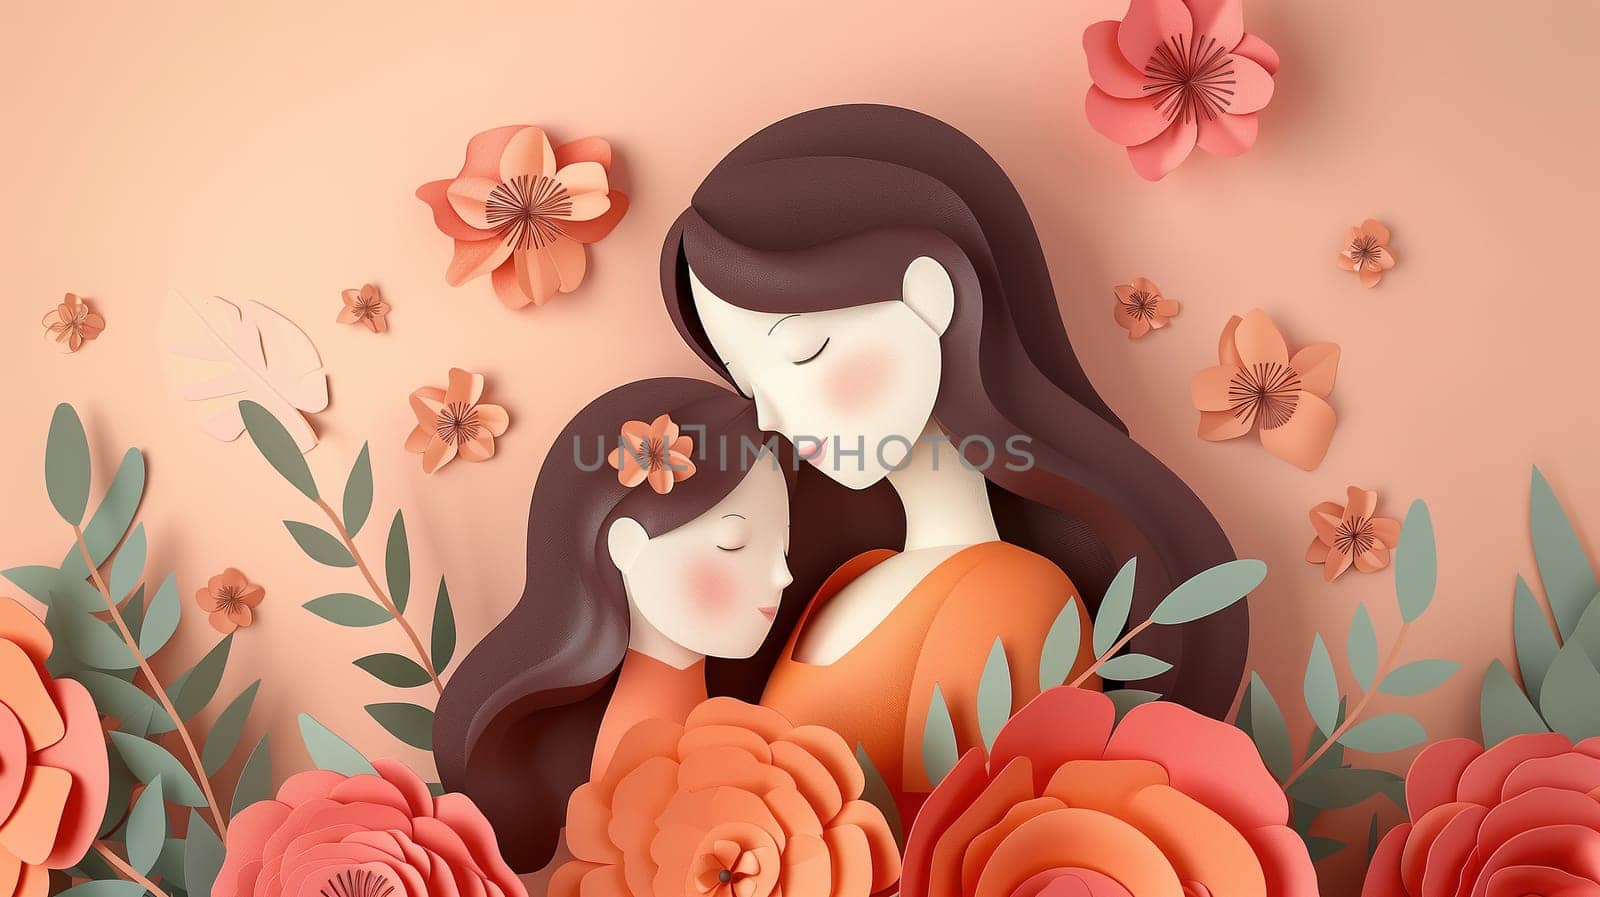 A woman lovingly holds a child in her arms, surrounded by a beautiful array of colorful flowers in bloom. The mothers embrace is tender and protective, showcasing the strong bond between parent and child.